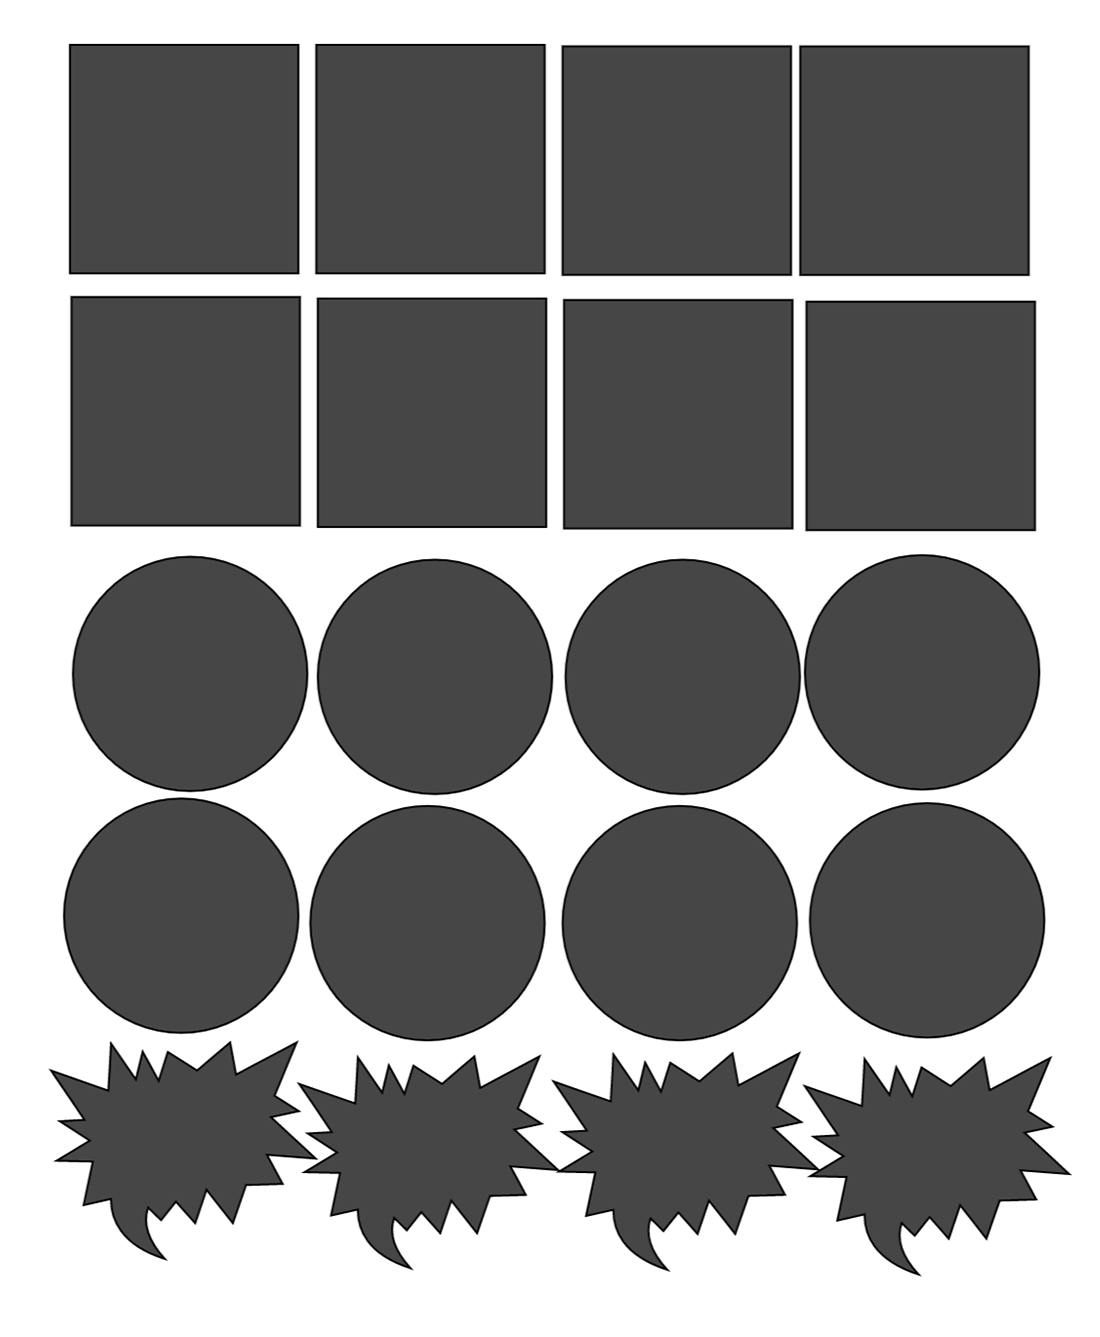 Make a template and attach together to have a pattern to follow to make you print and cut stickers